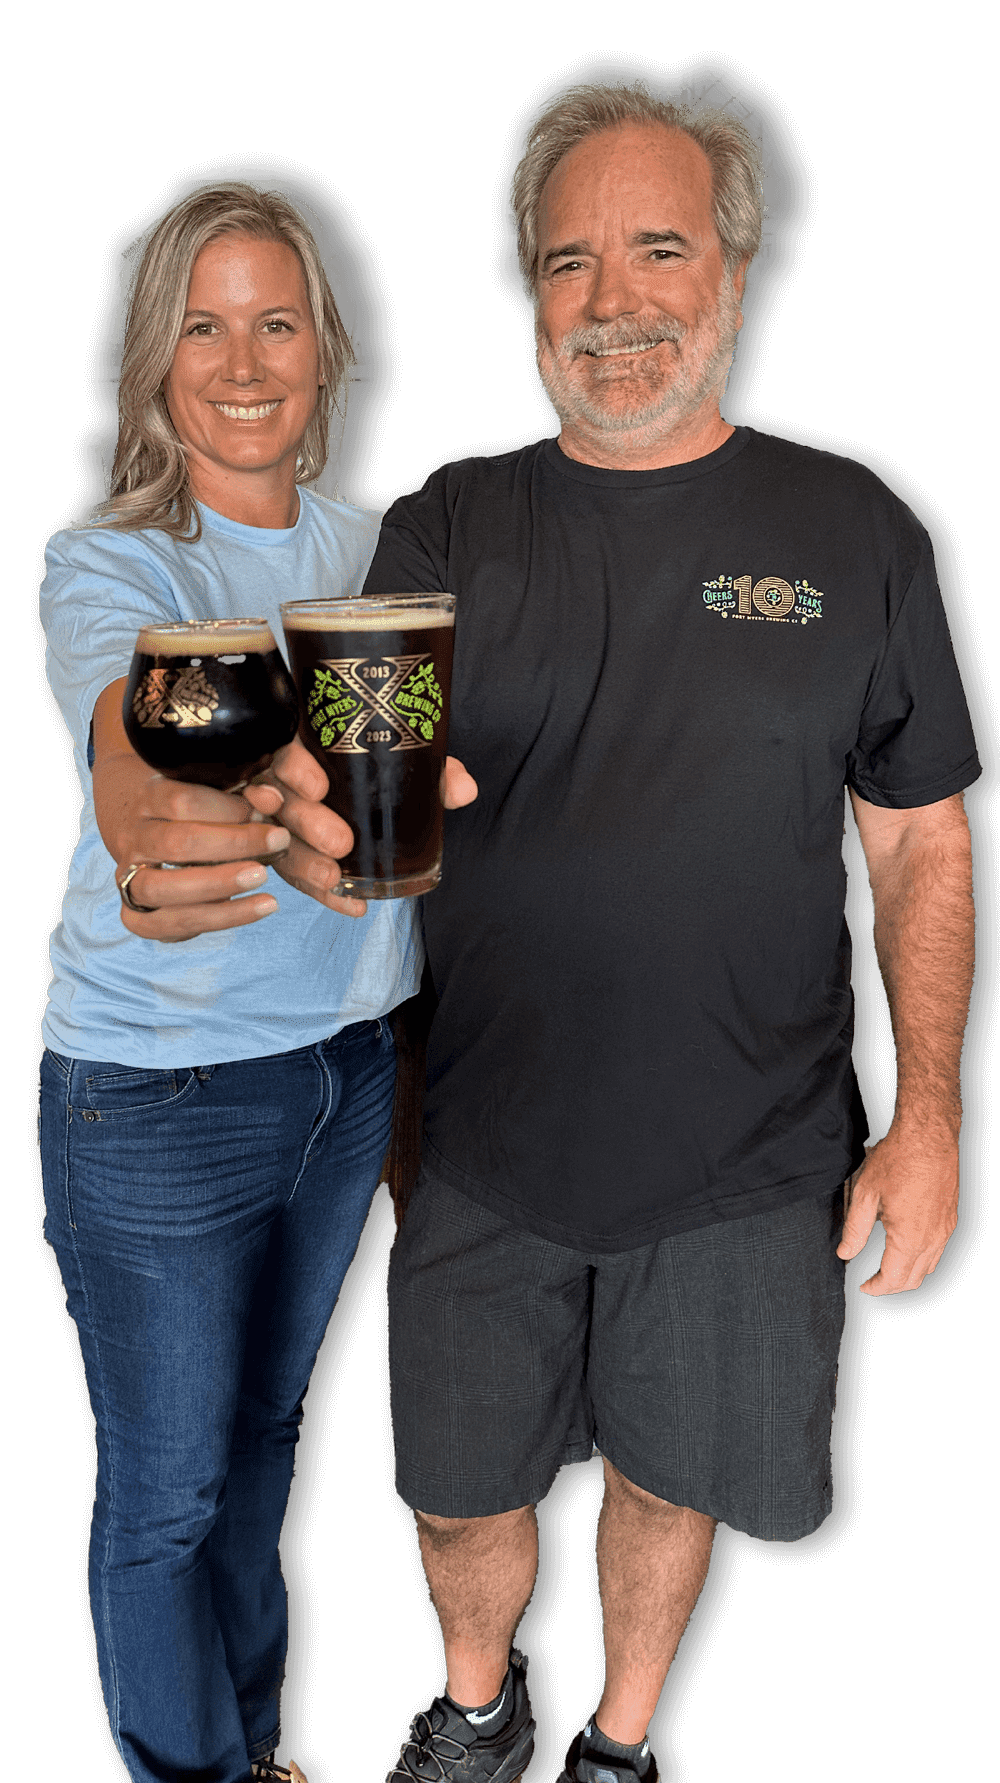 A man and woman holding a beer in front of a black background.